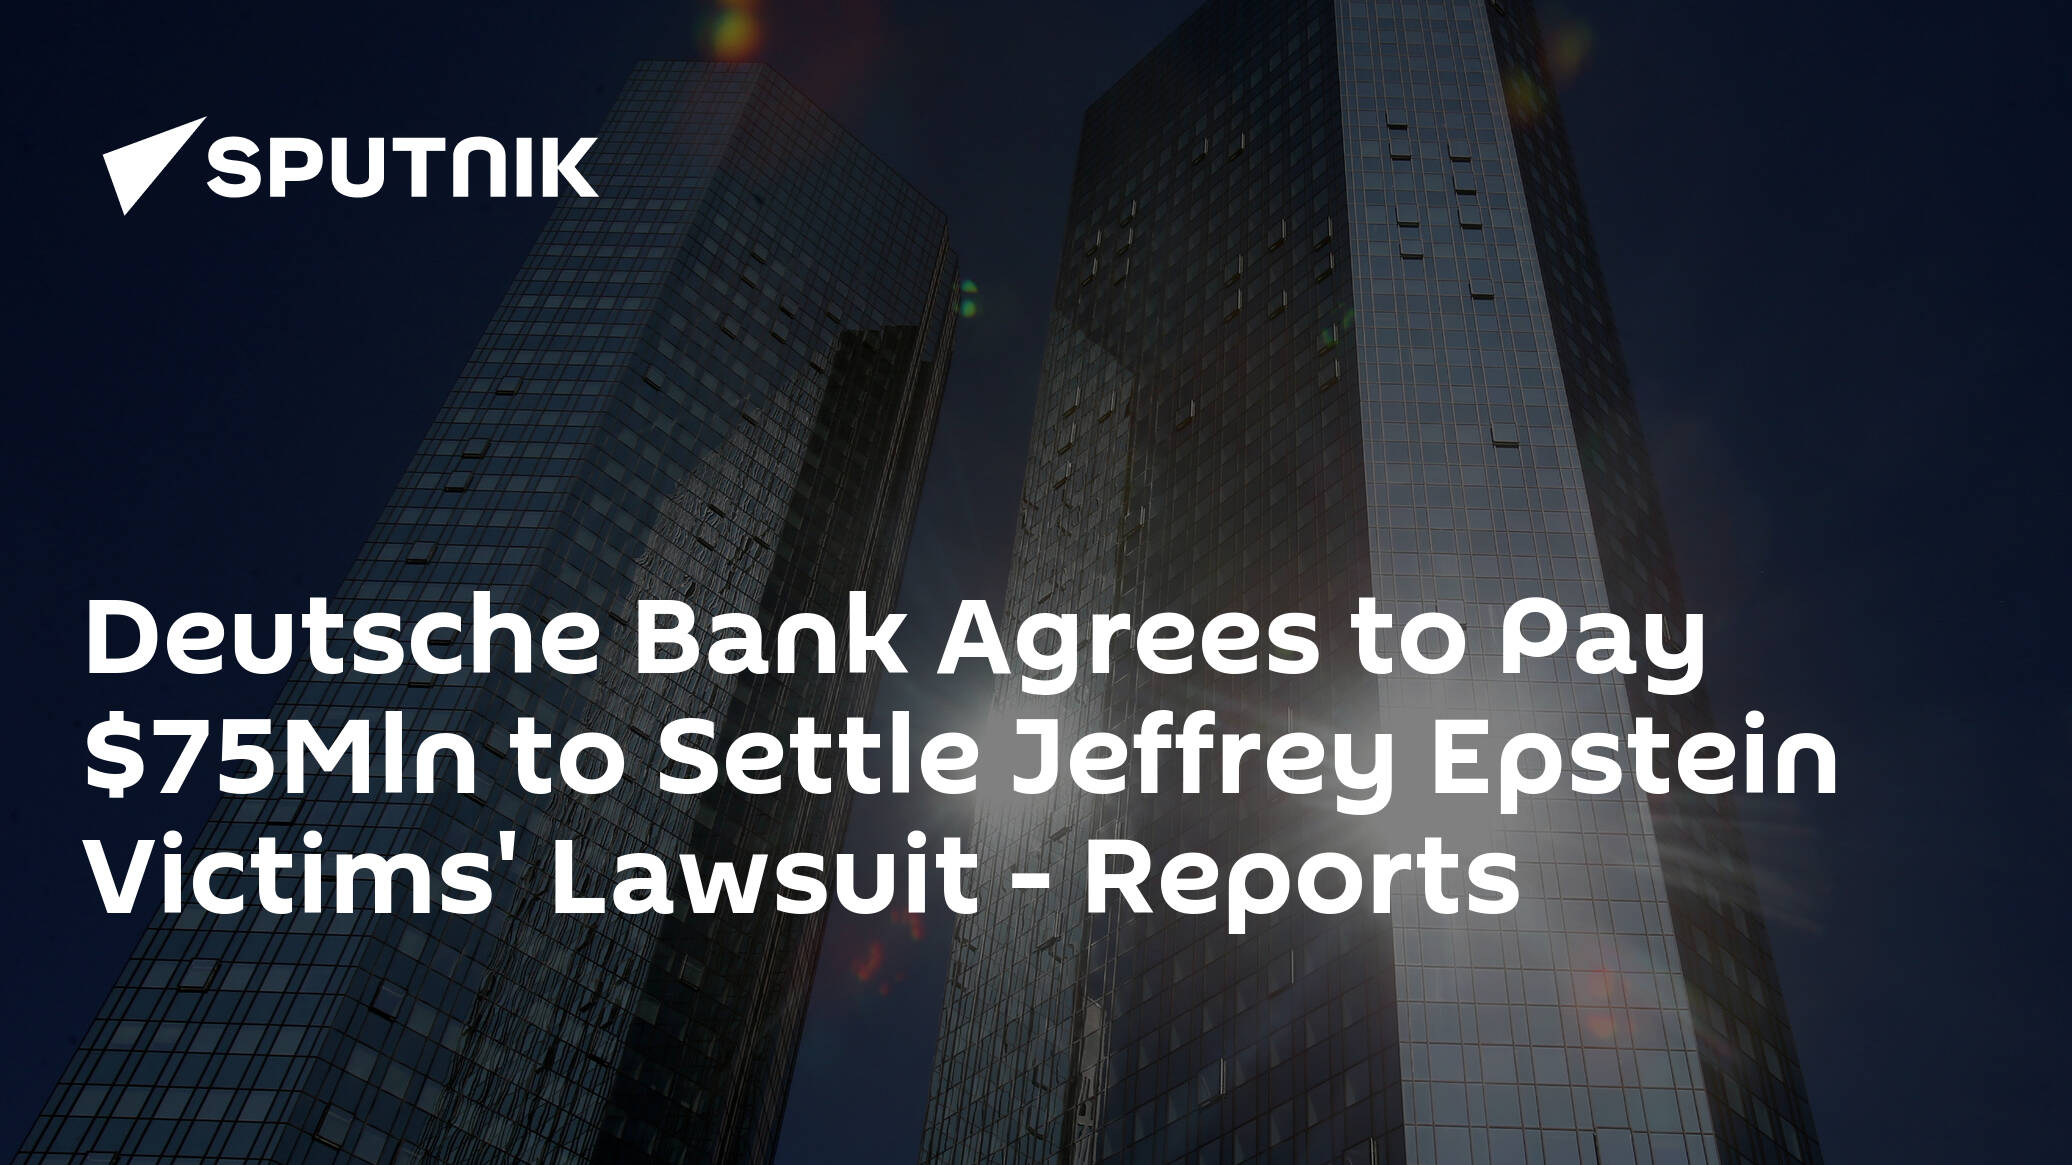 Deutsche Bank Agrees to Pay Mln to Settle Jeffrey Epstein Victims' Lawsuit – Reports